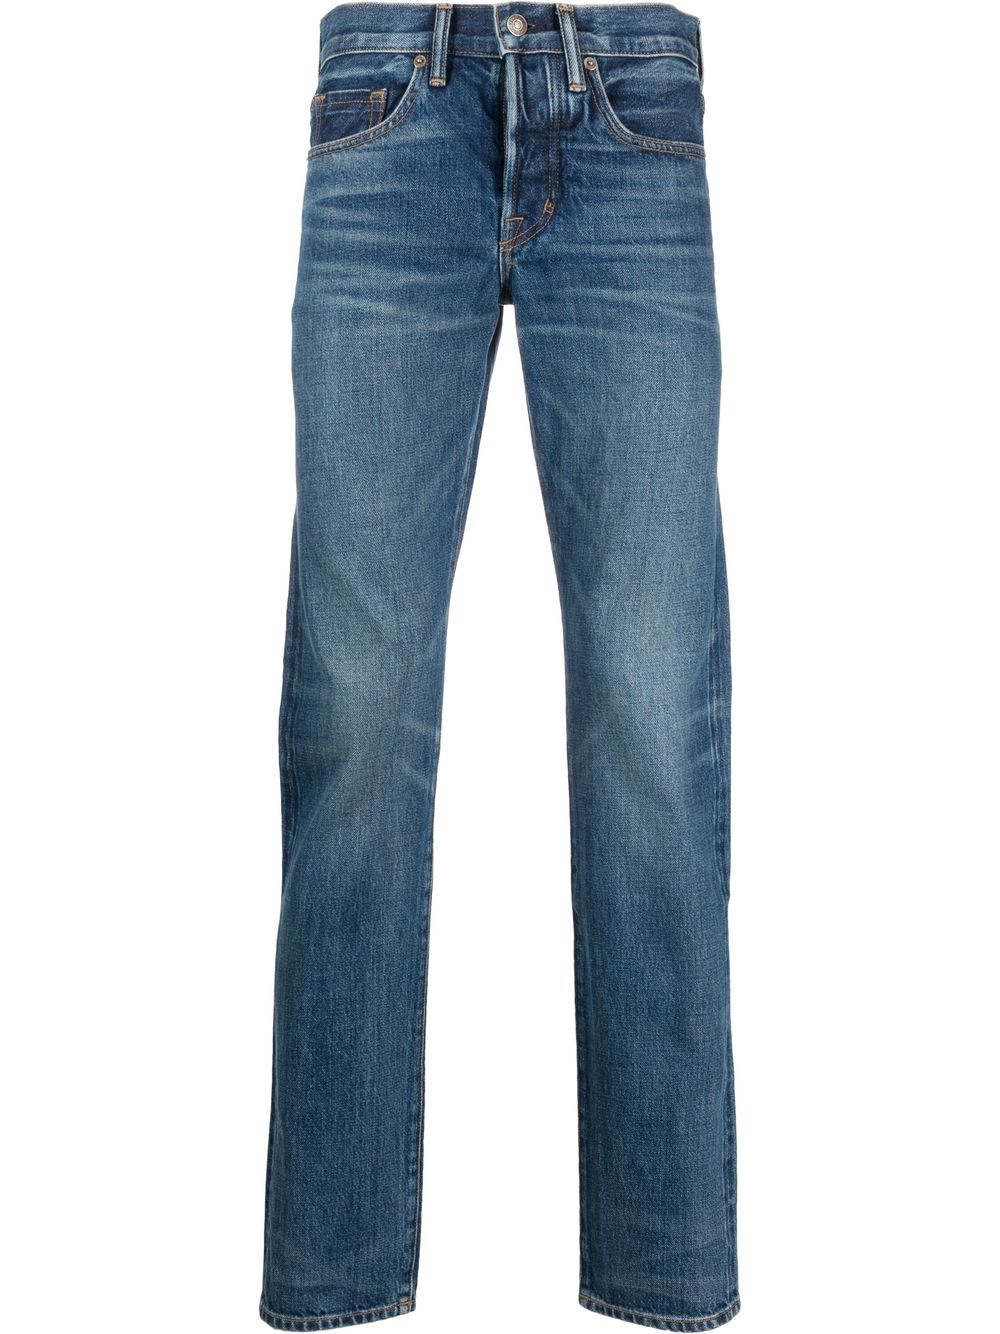 TOM FORD low-rise slim-fit jeans - Blue von TOM FORD